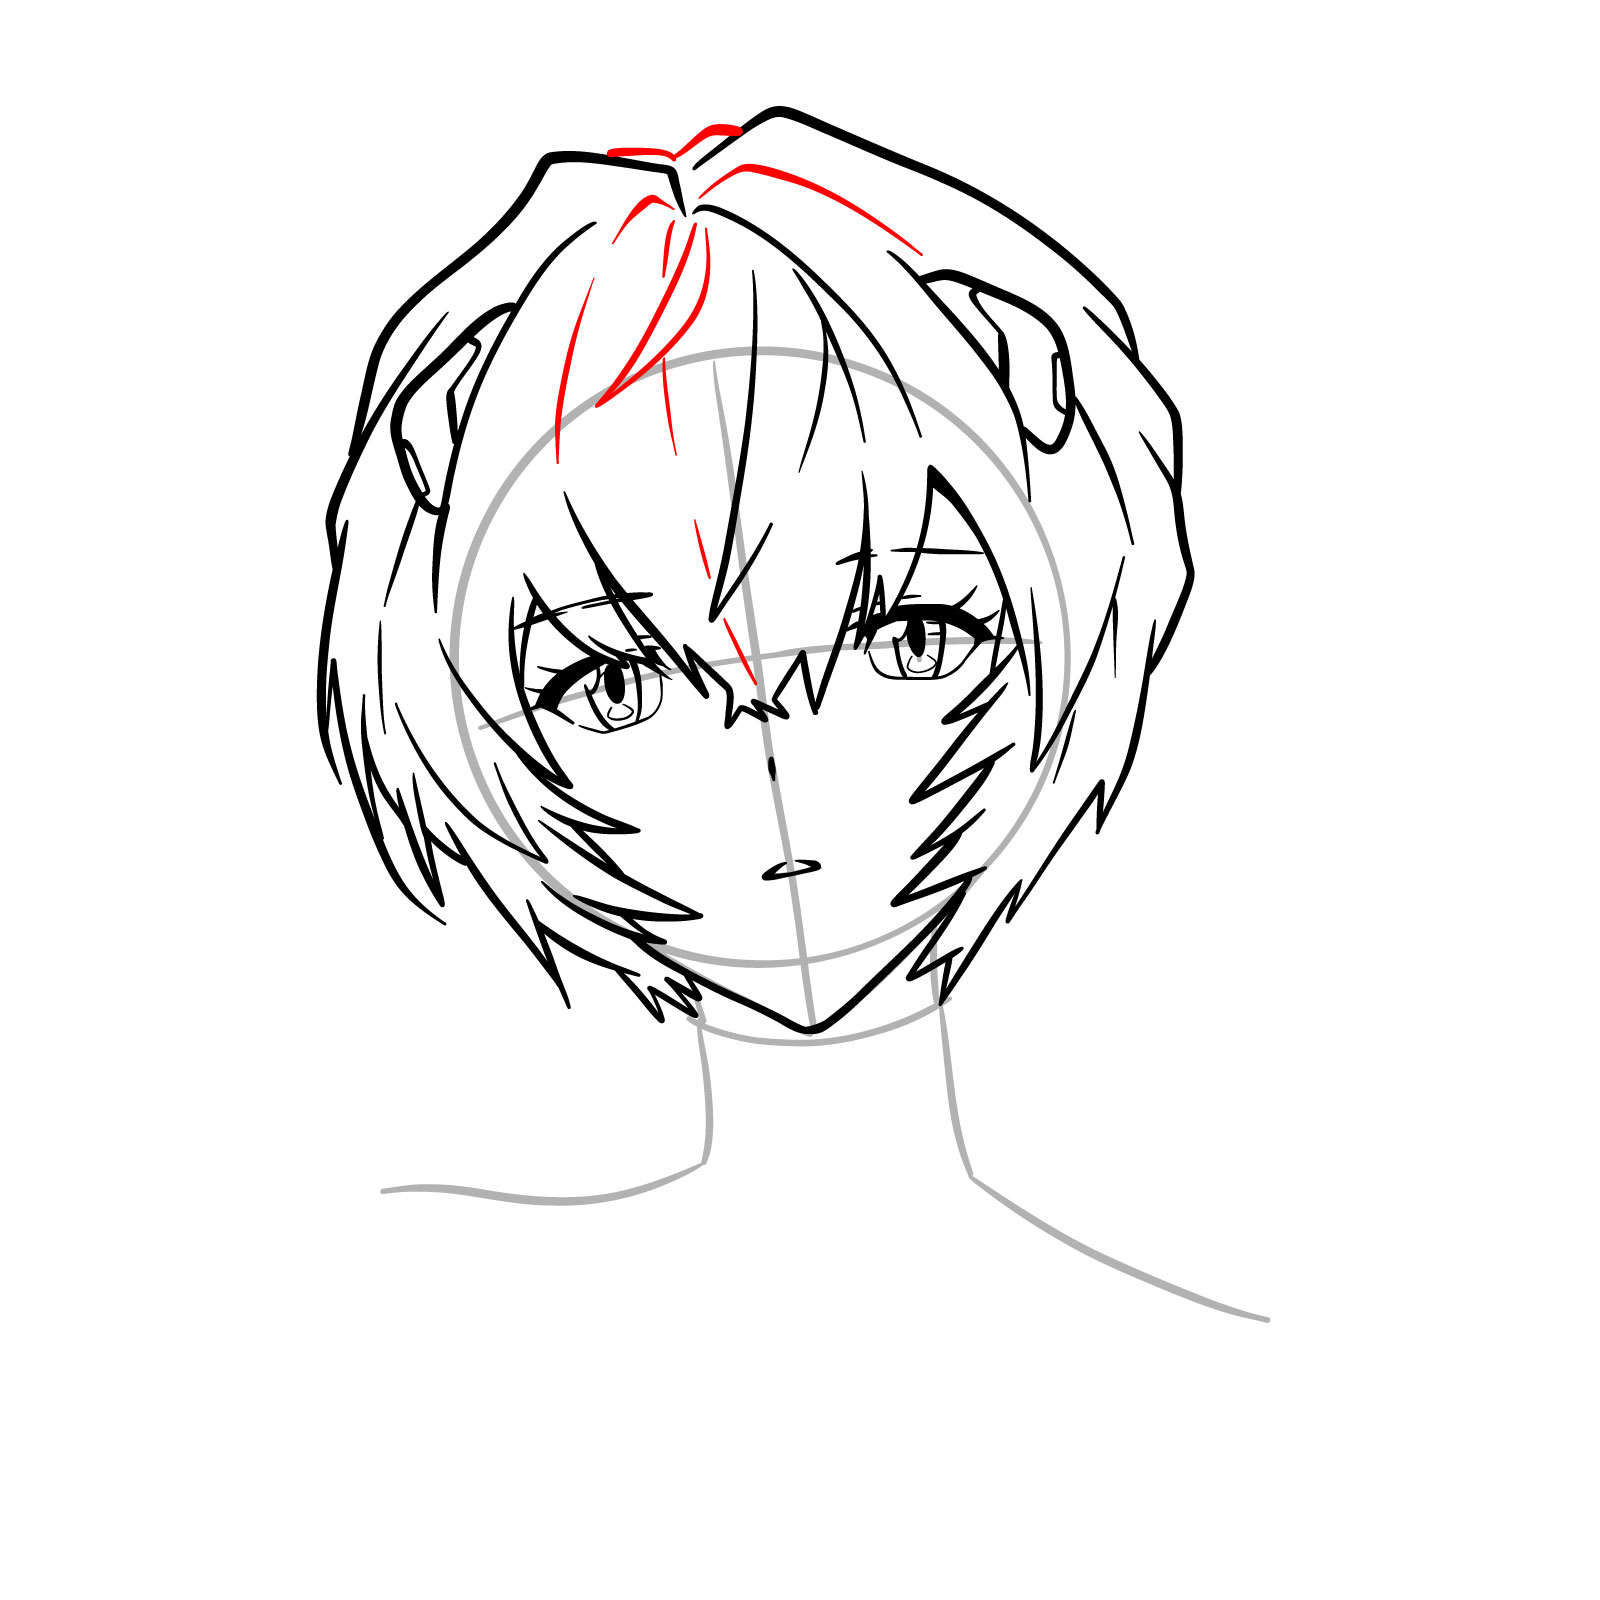 How to draw Rei Ayanami's face - Evangelion - step 16